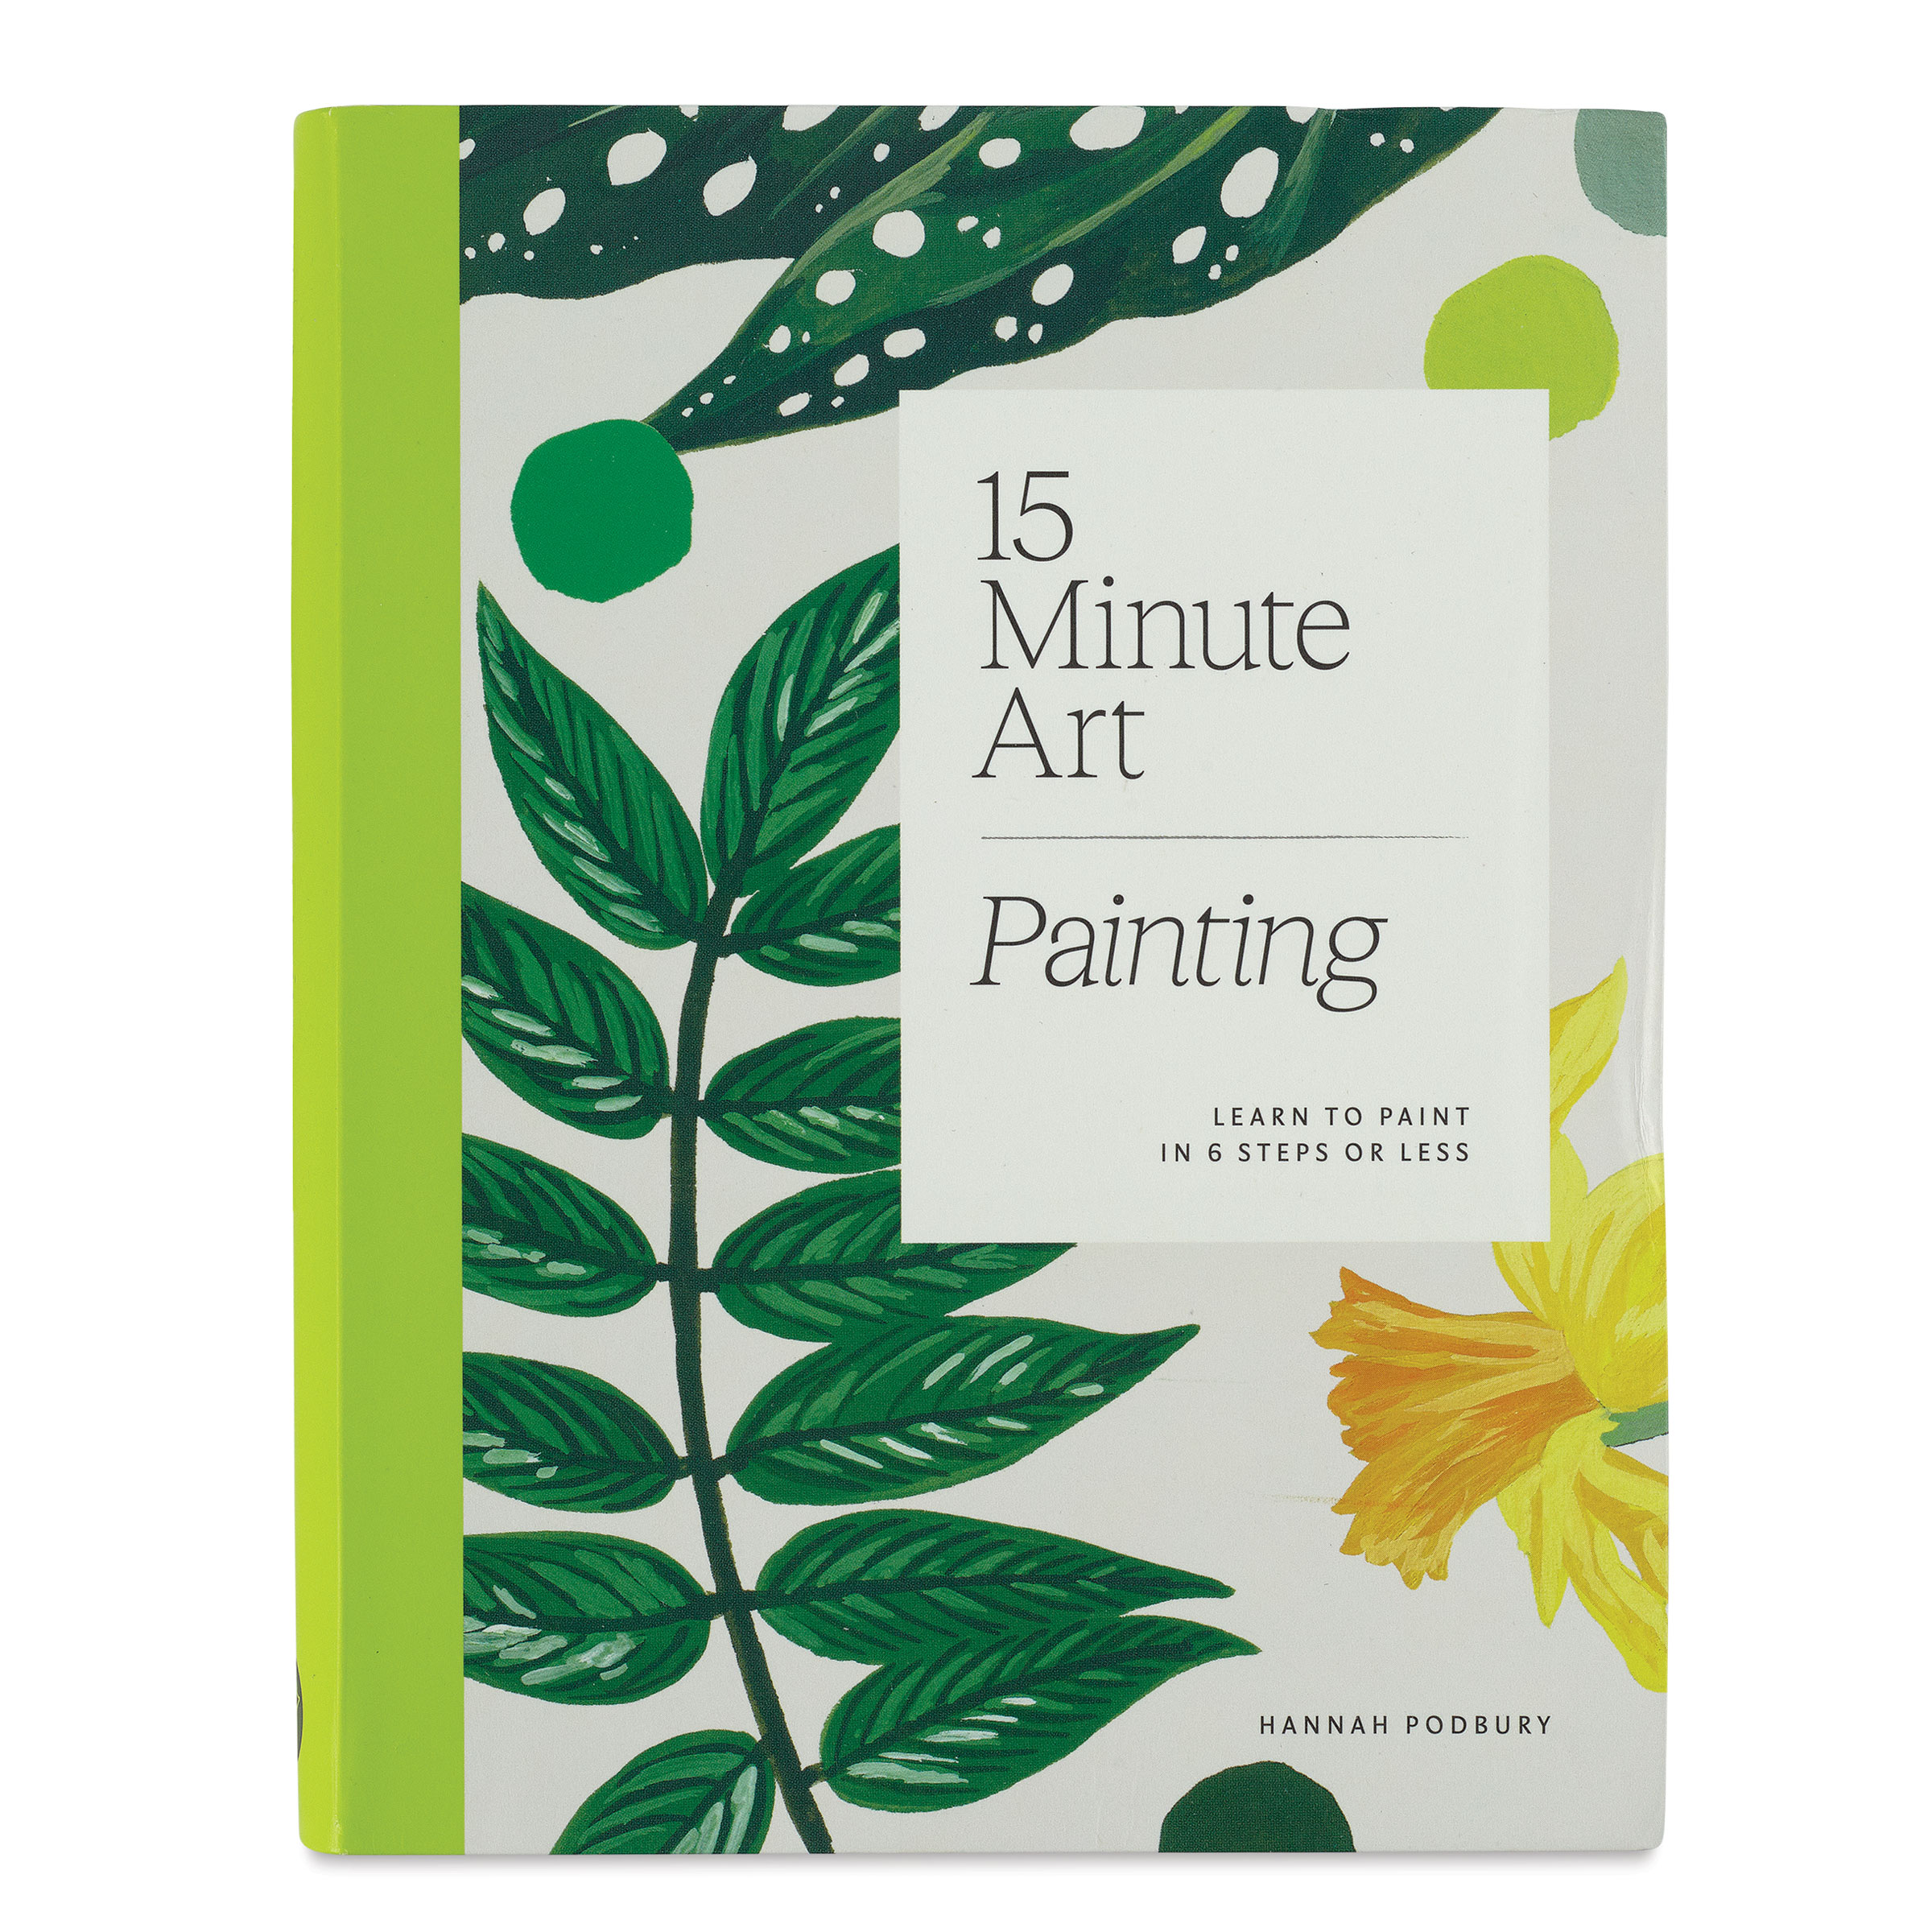 Drink Laugh Paint: How To Host A Painting Party [Book]